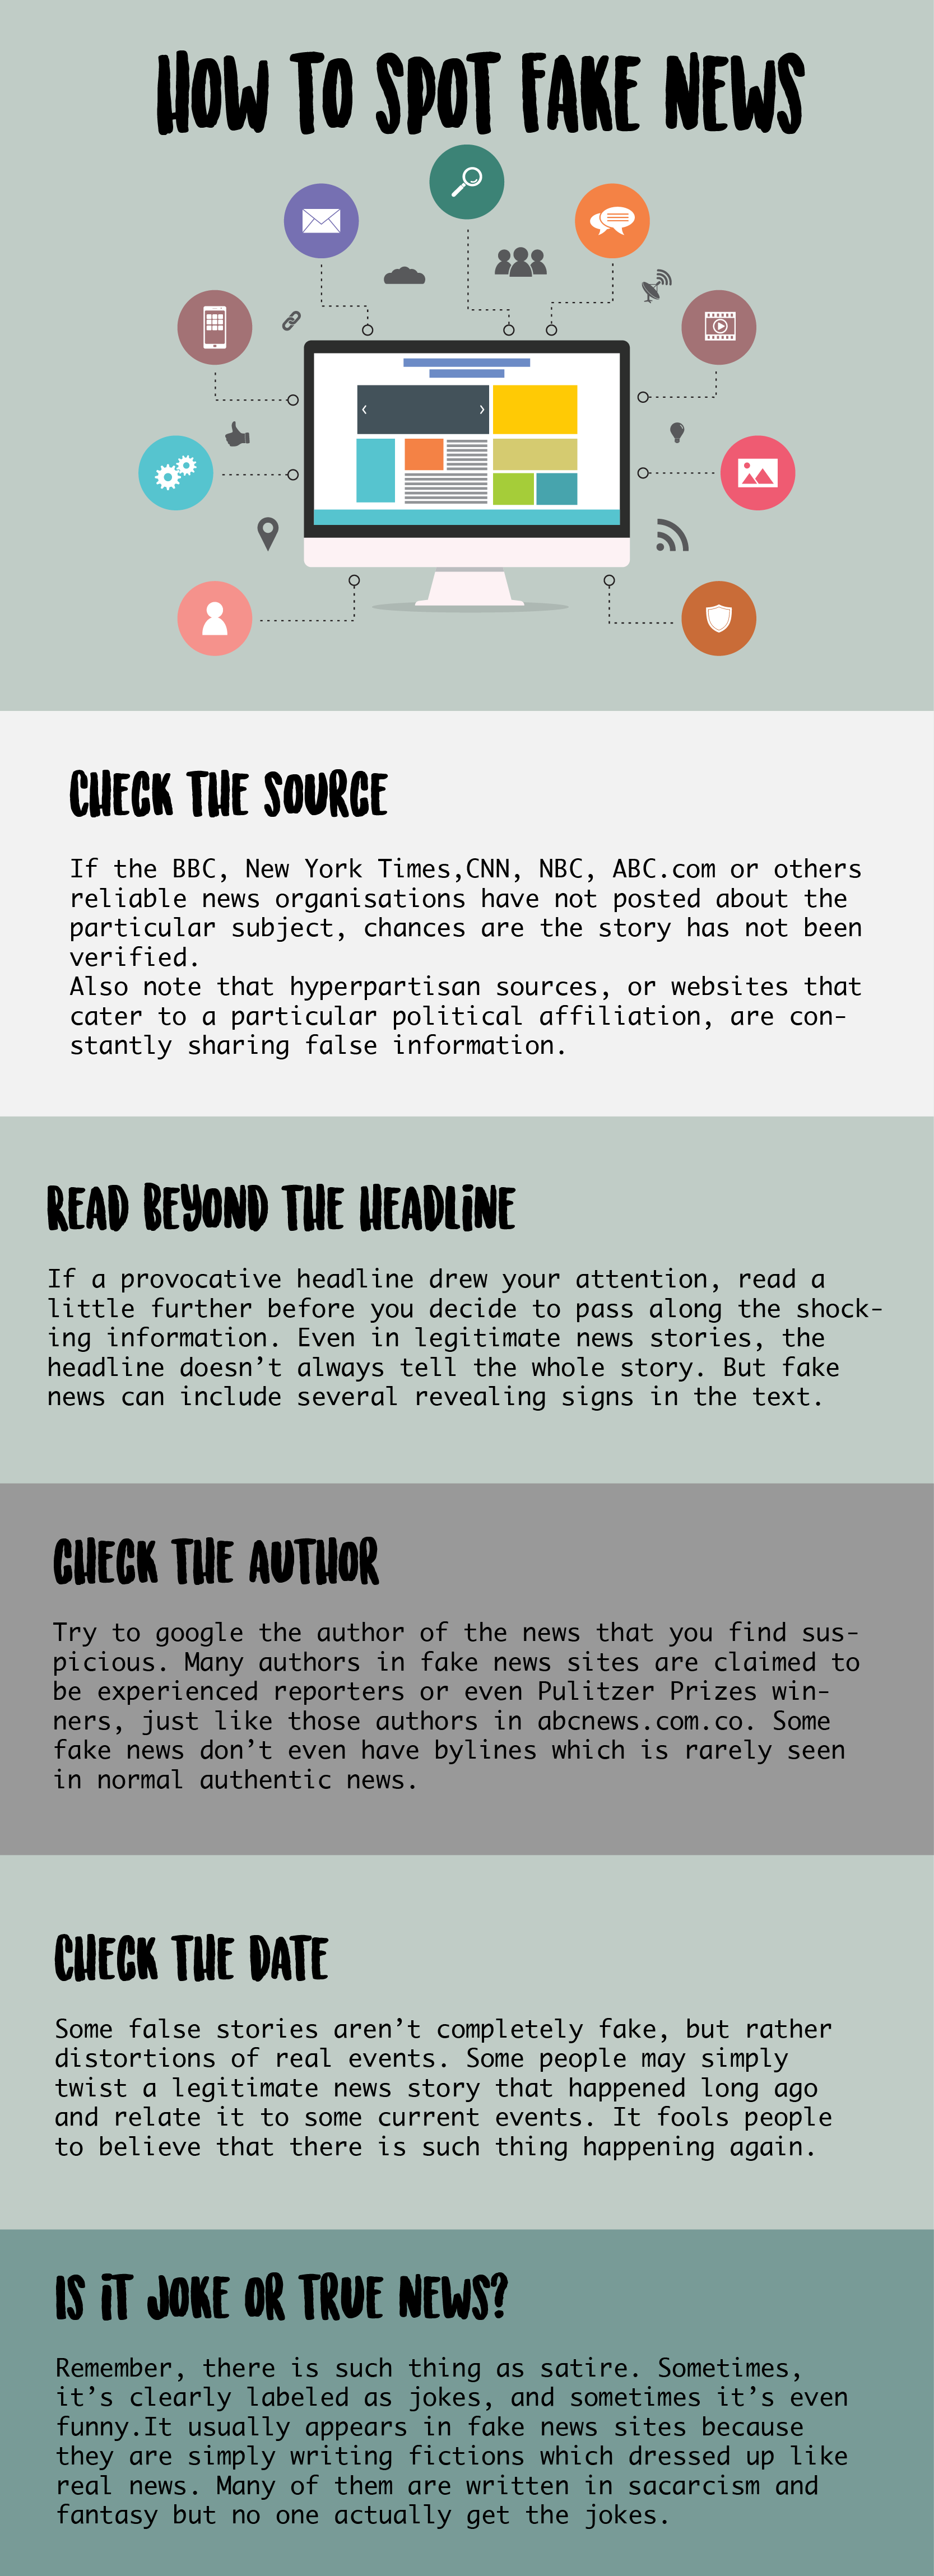 5 tips to spot fake news illustration with infographics